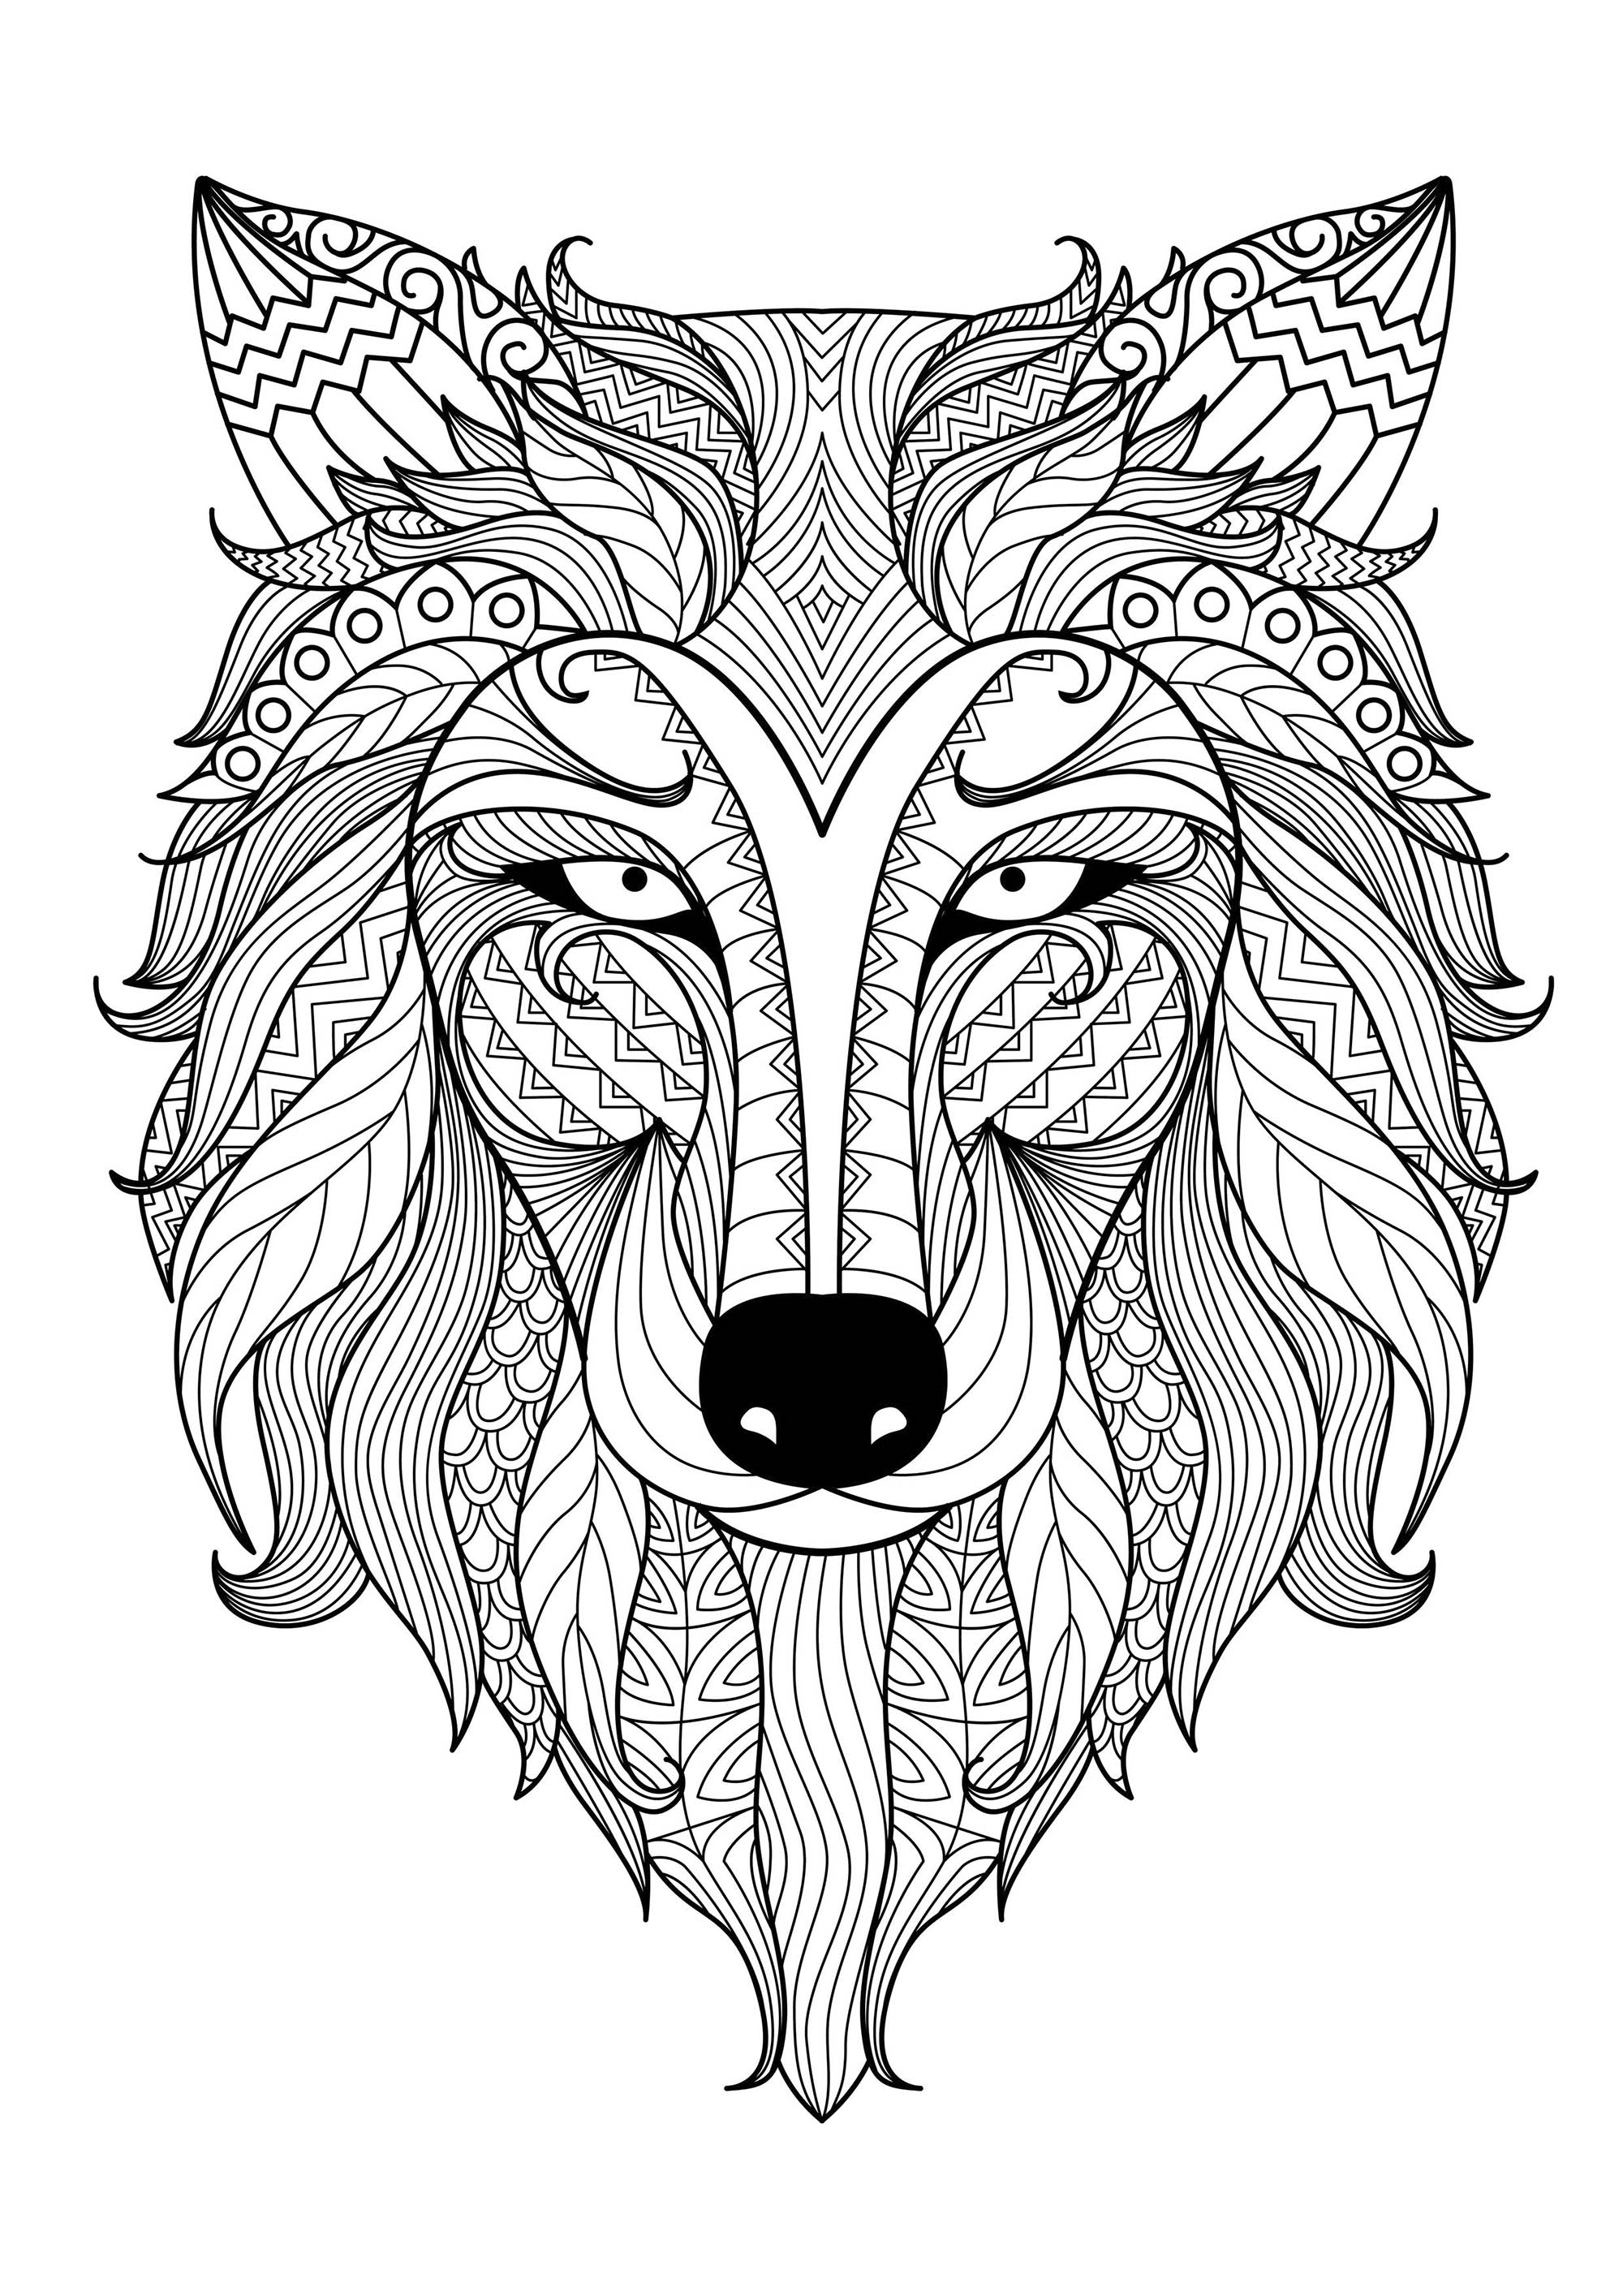 Incroyable-loup-par-bimdeedee - Wolves Adult Coloring Pages